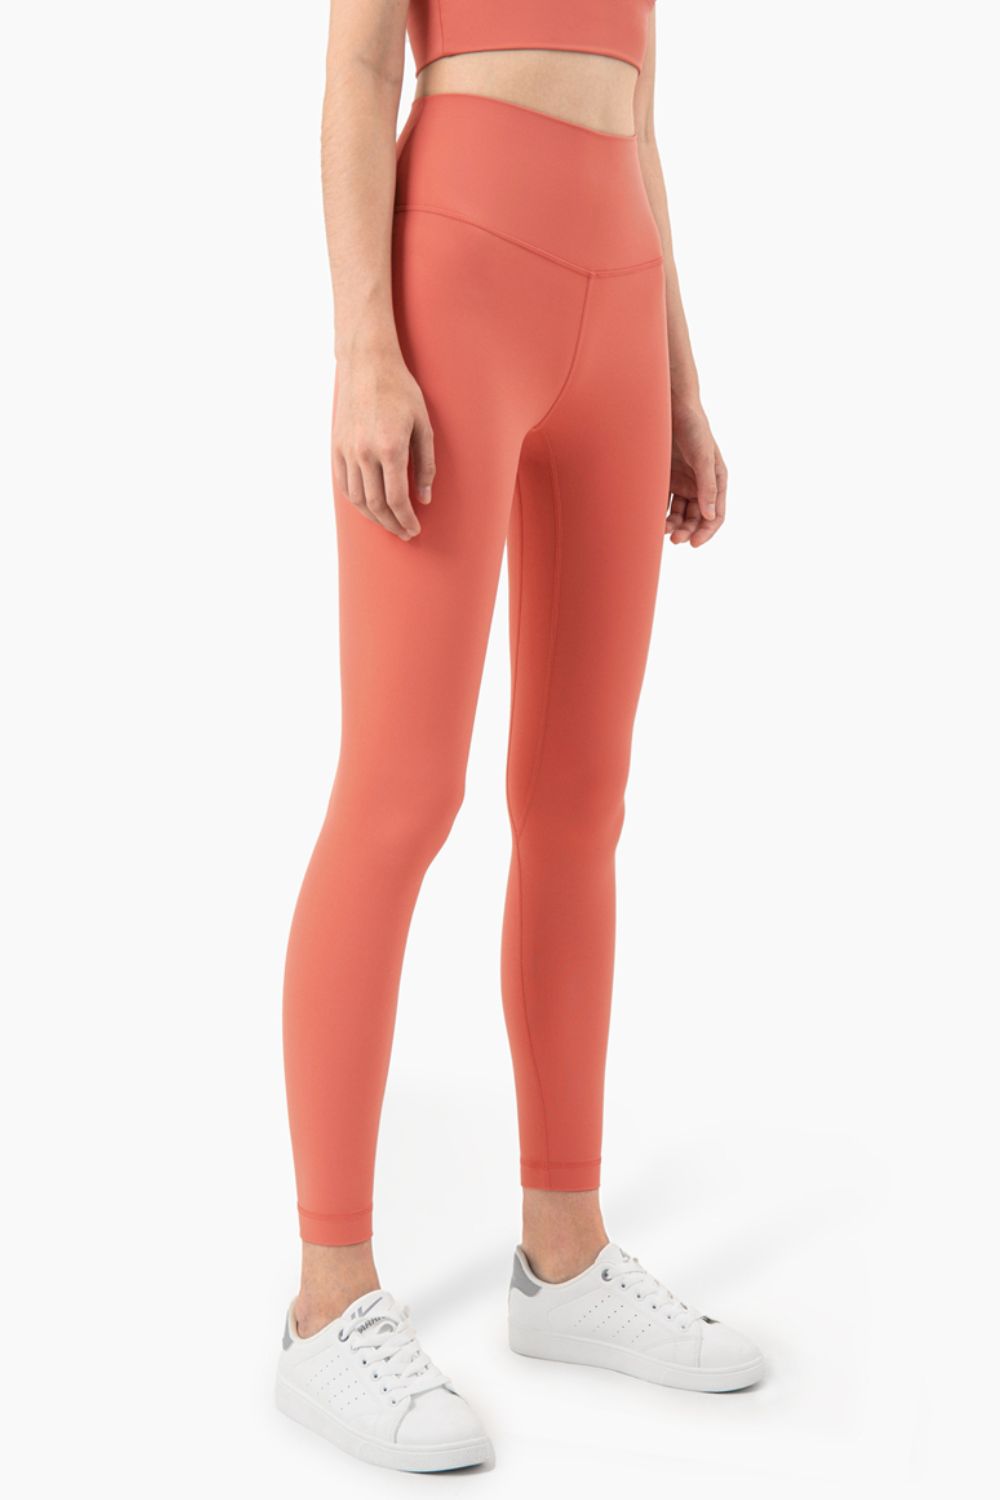 SAGE Collective Printed Peached Ultra High-rise 7/8 Legging